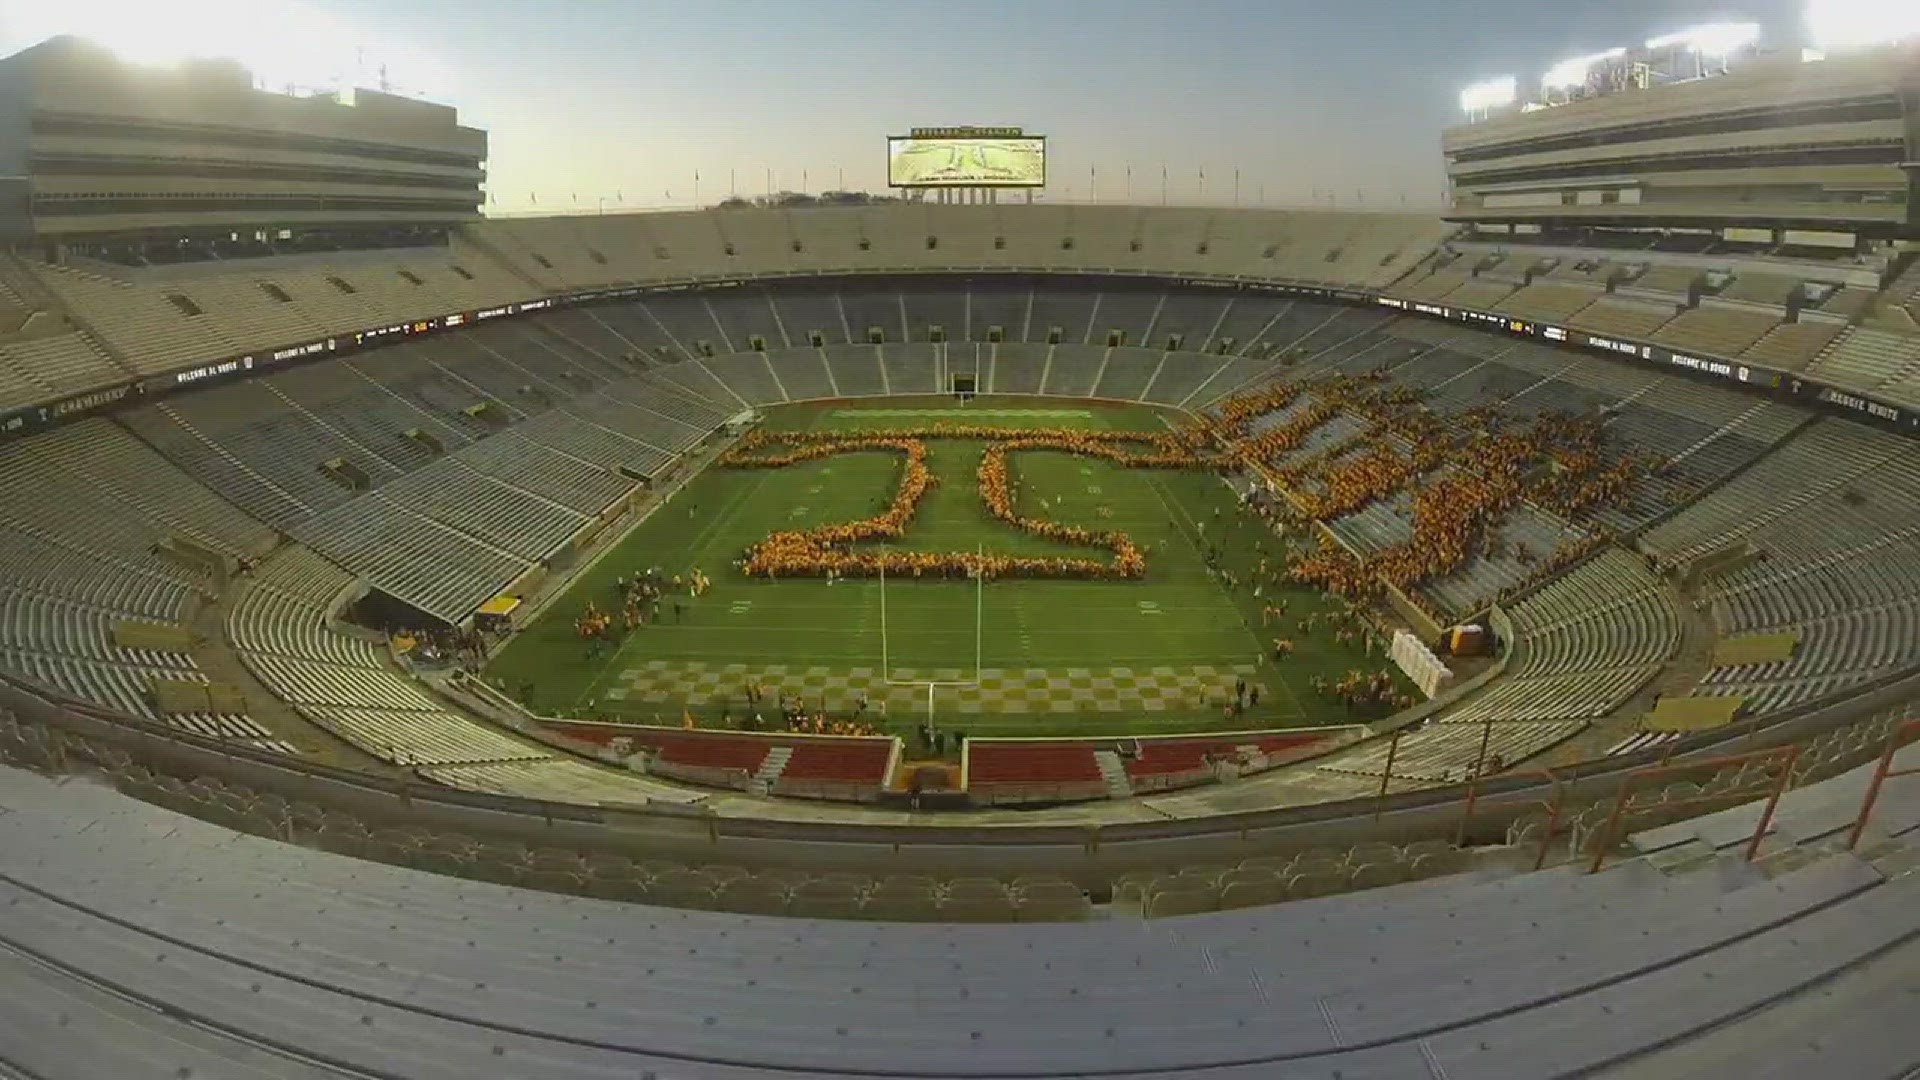 With the Today show audience watching, UT set a world record for making the largest human letter in Neyland Stadium.